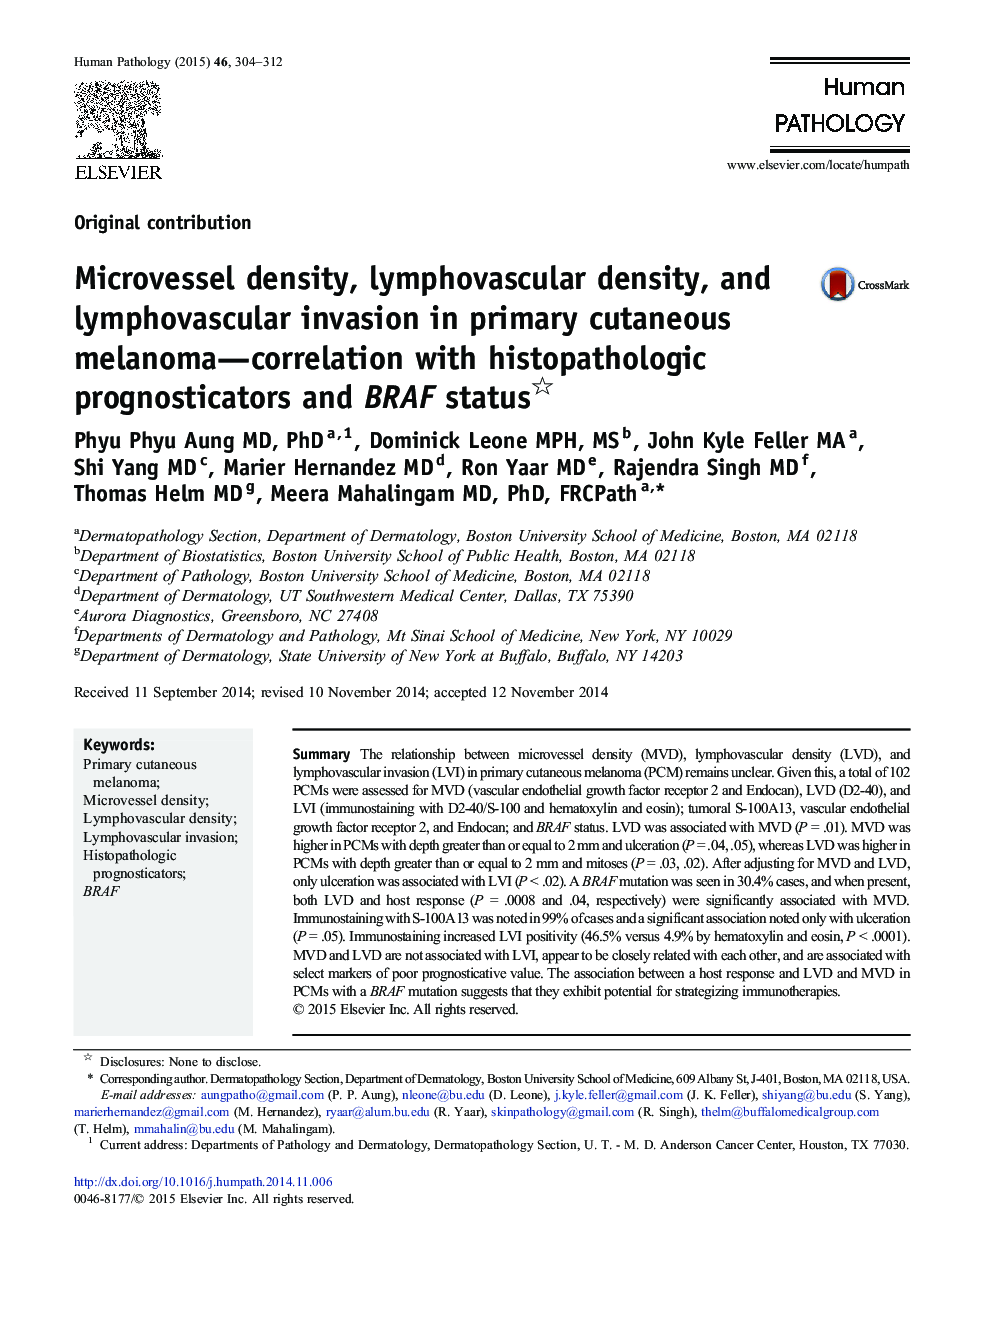 Microvessel density, lymphovascular density, and lymphovascular invasion in primary cutaneous melanoma—correlation with histopathologic prognosticators and BRAF status 